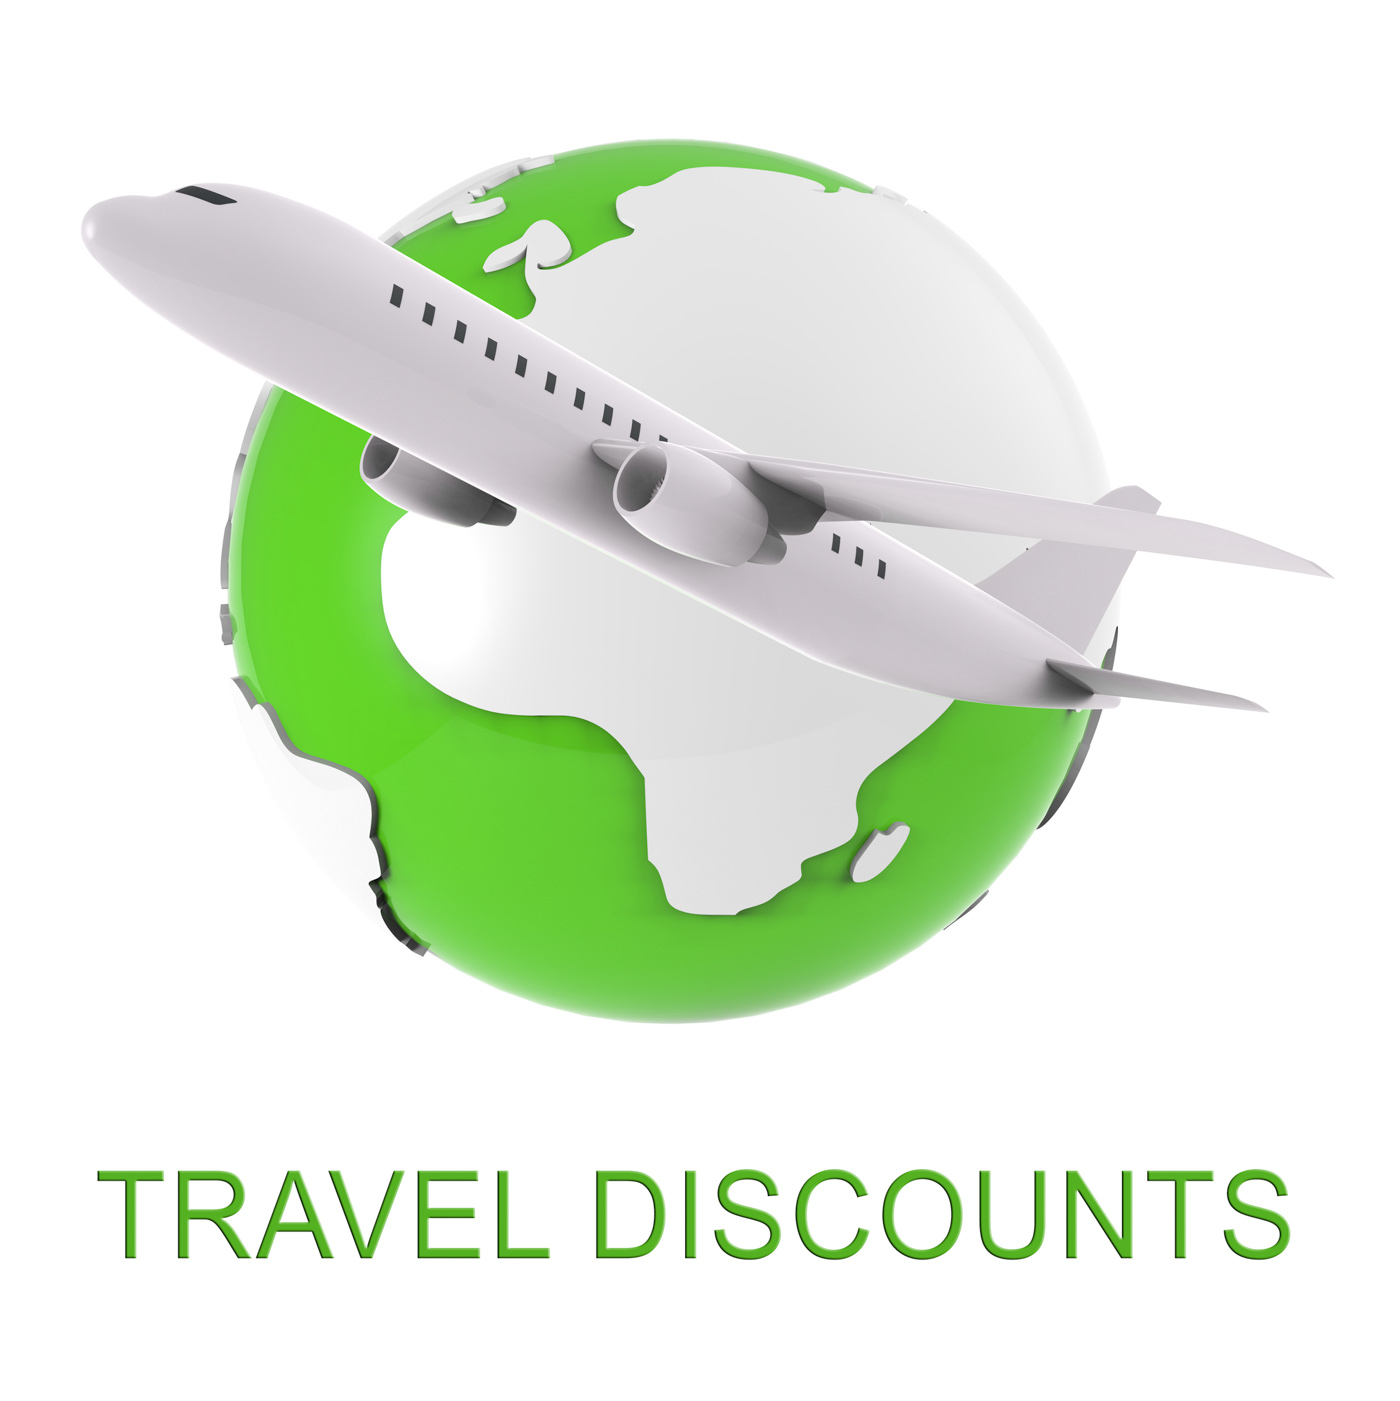 Travel discounts indicates journey reduction 3d rendering photo